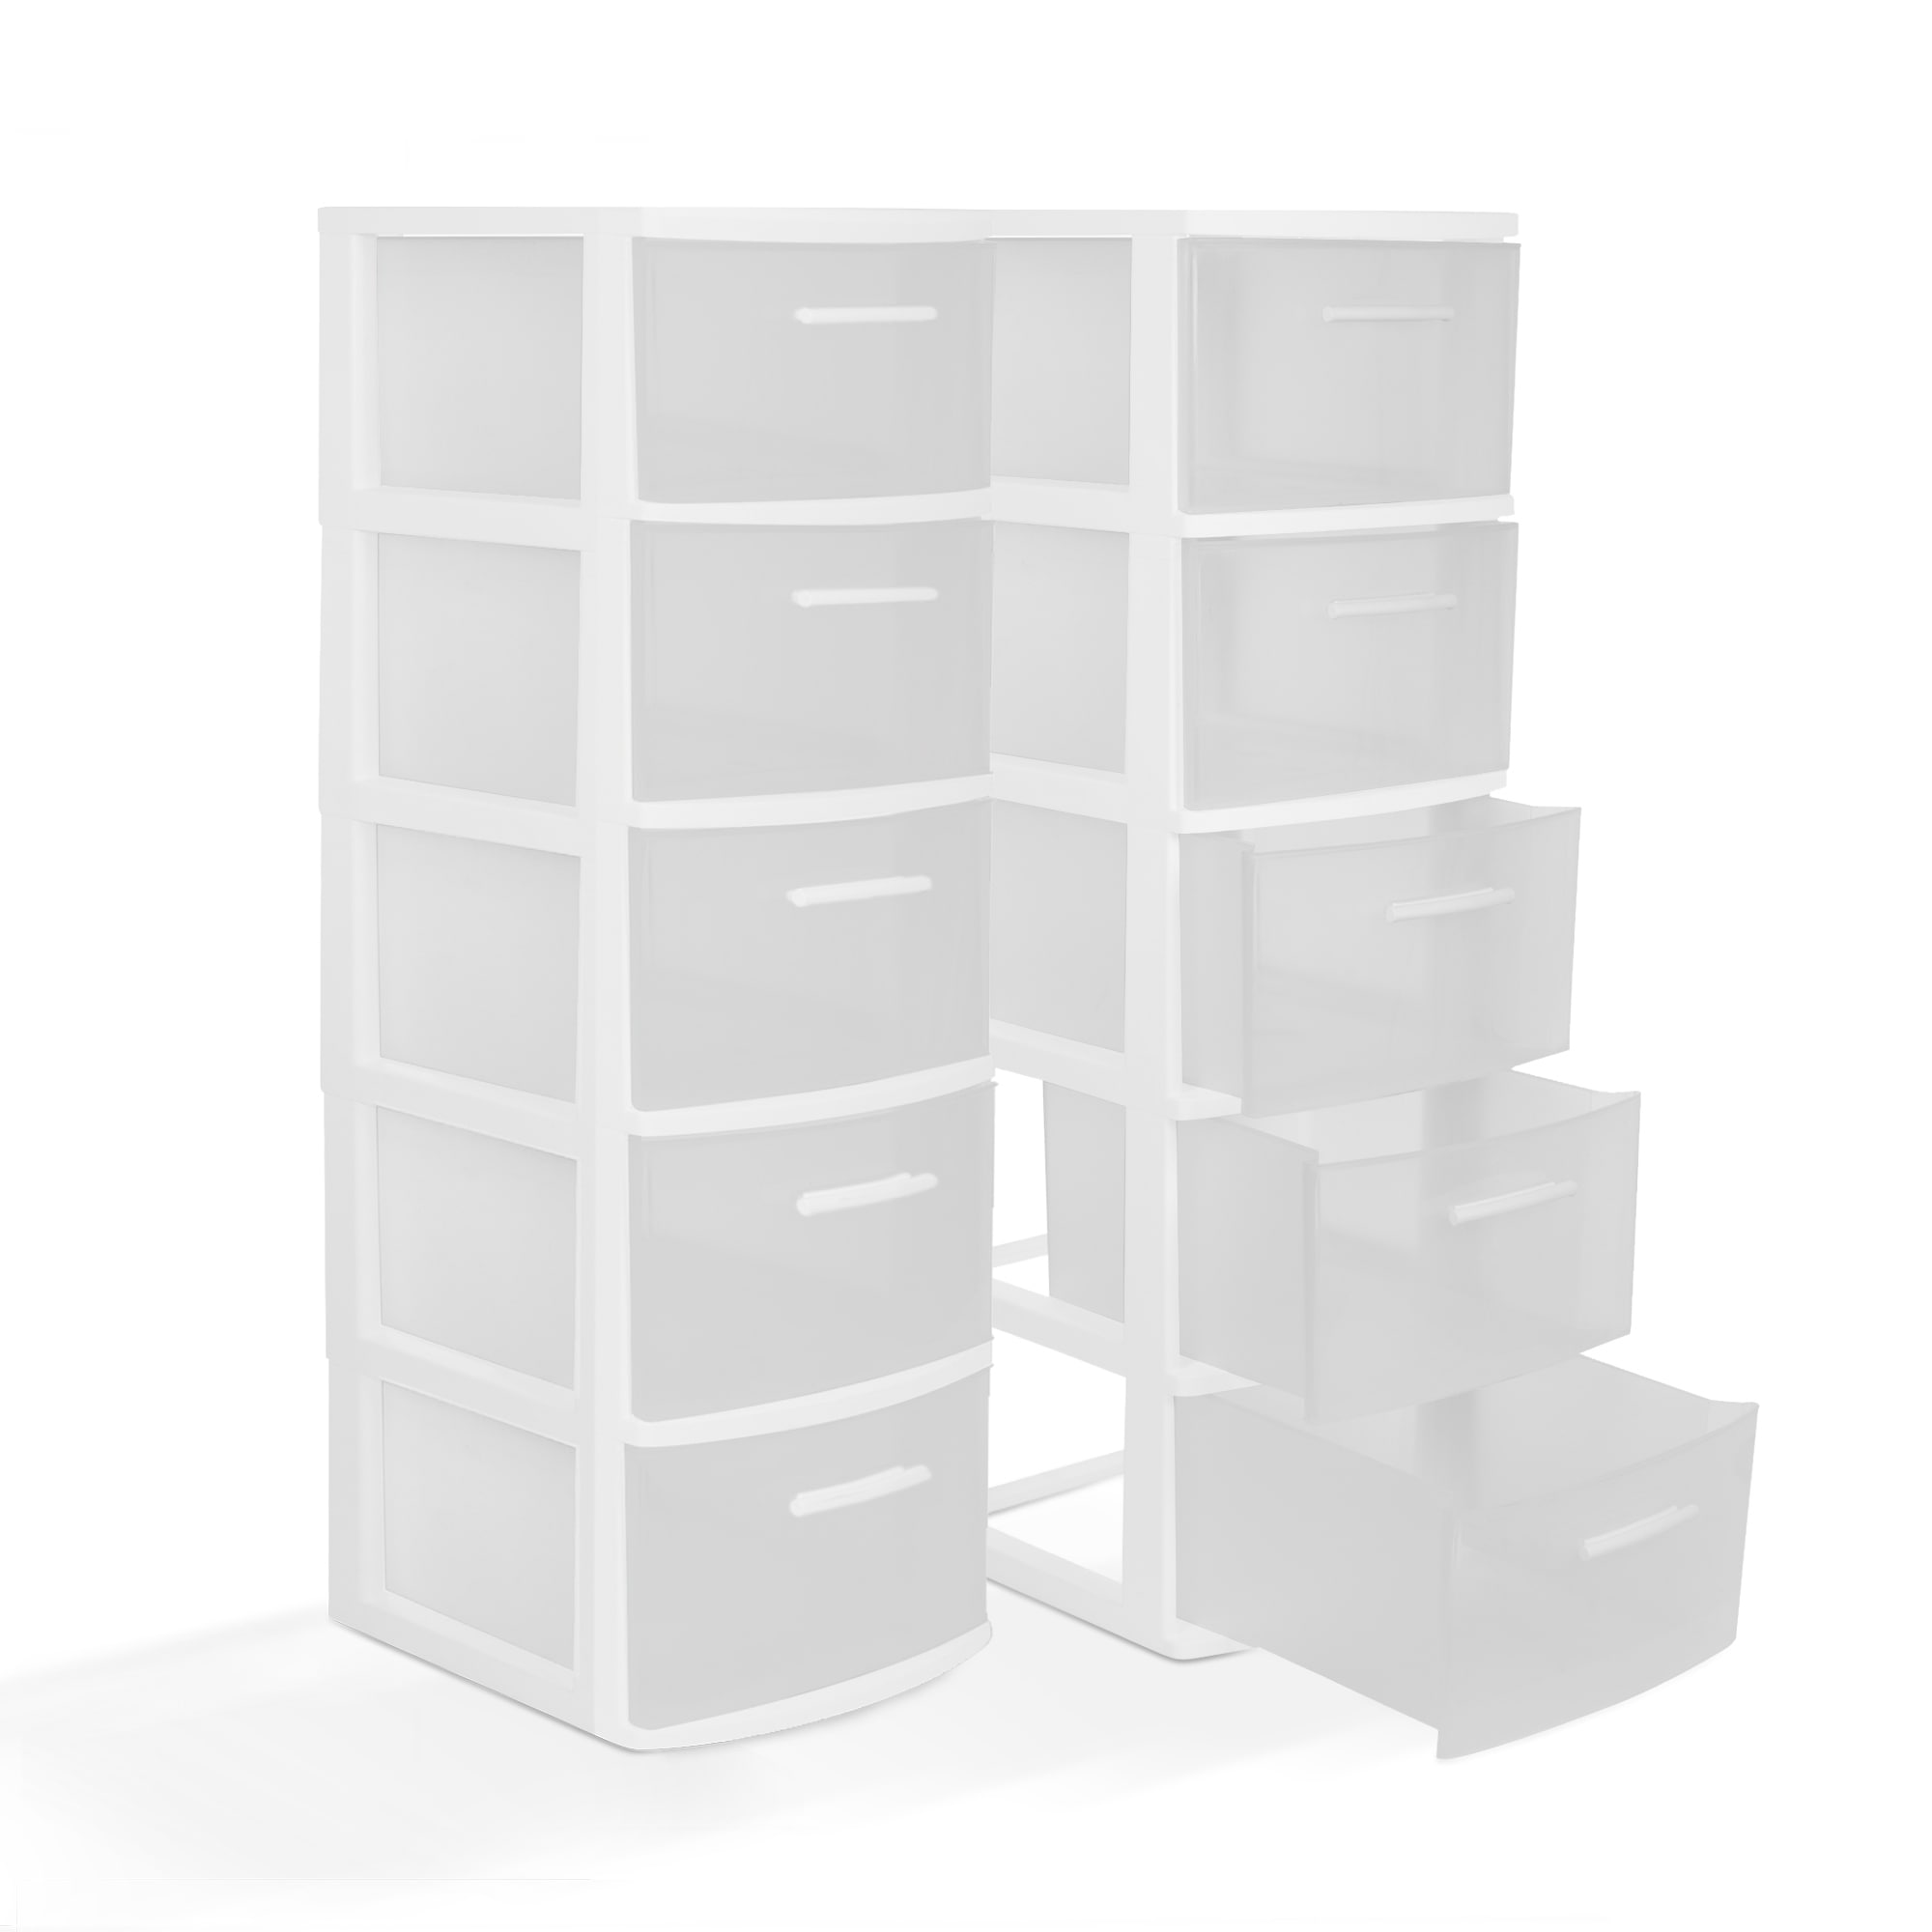 https://ak1.ostkcdn.com/images/products/is/images/direct/4778af01595de1a0d9351427475792bd91c24b4e/MQ-Eclypse-5-Drawer-Plastic-Storage-Unit-with-Clear-Drawers-%282-Pack%29.jpg